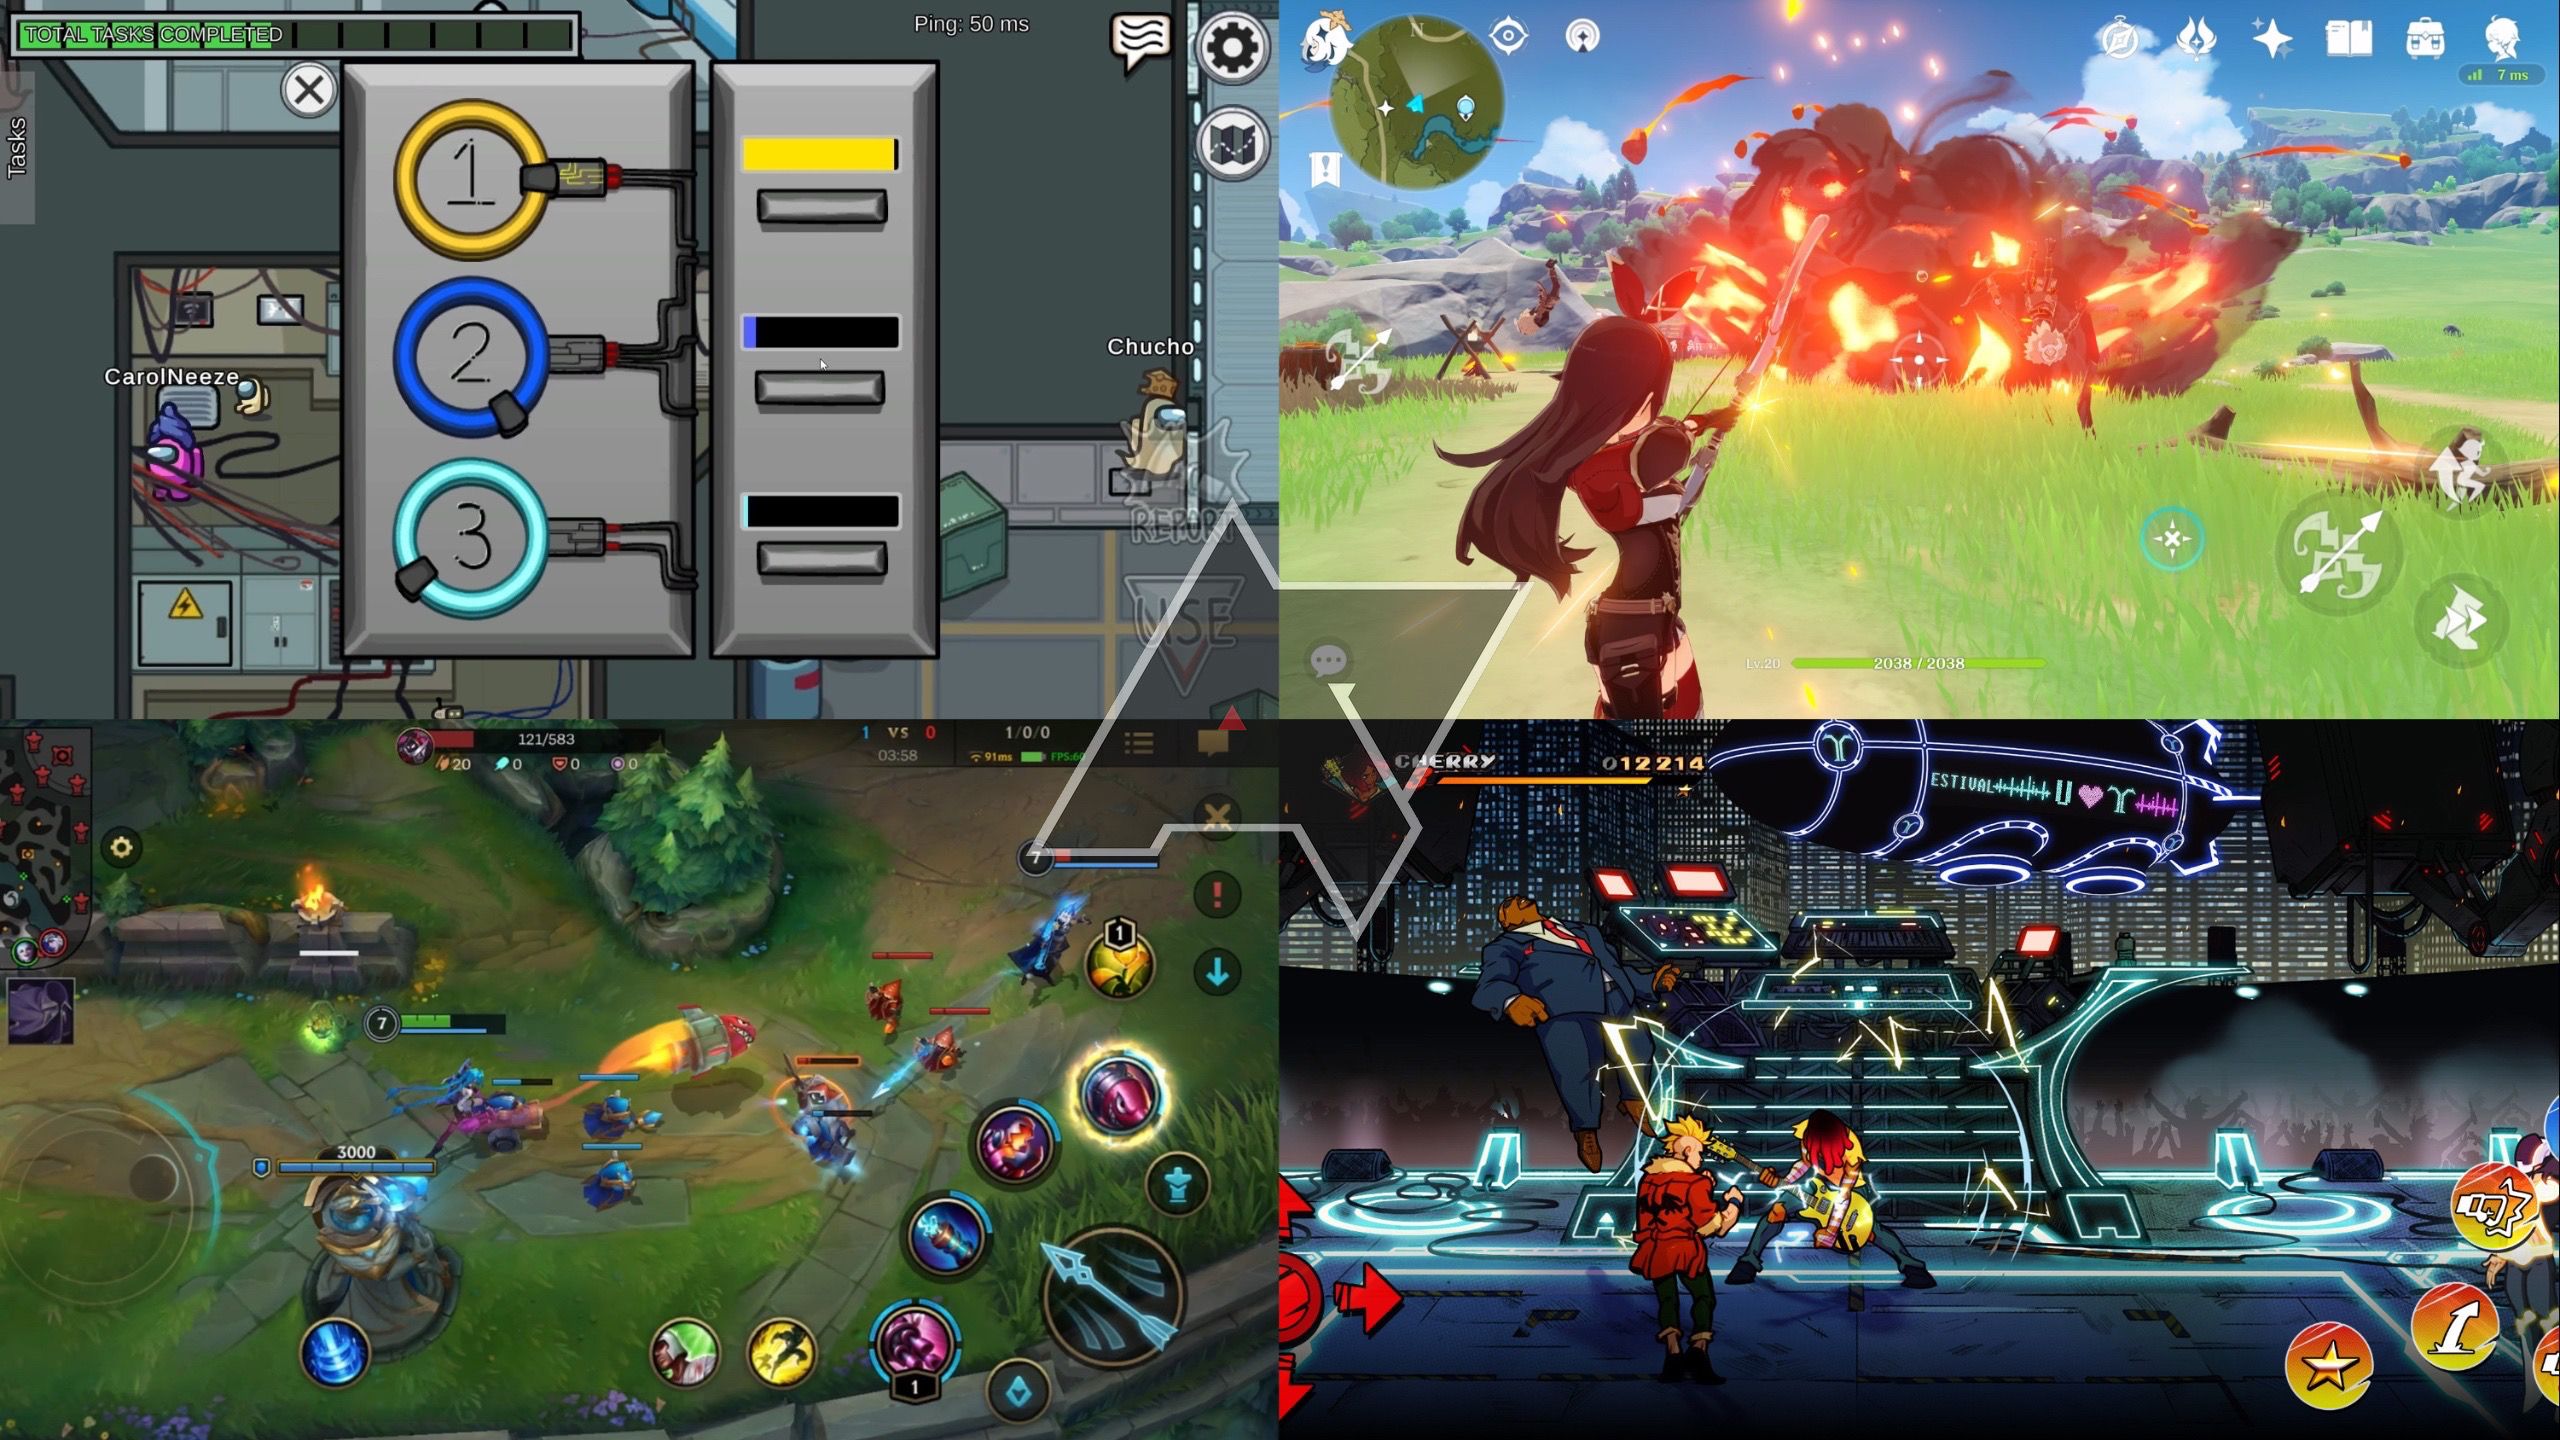 5 Best Cross-Platform Multiplayer Mobile Games to Play with Friends